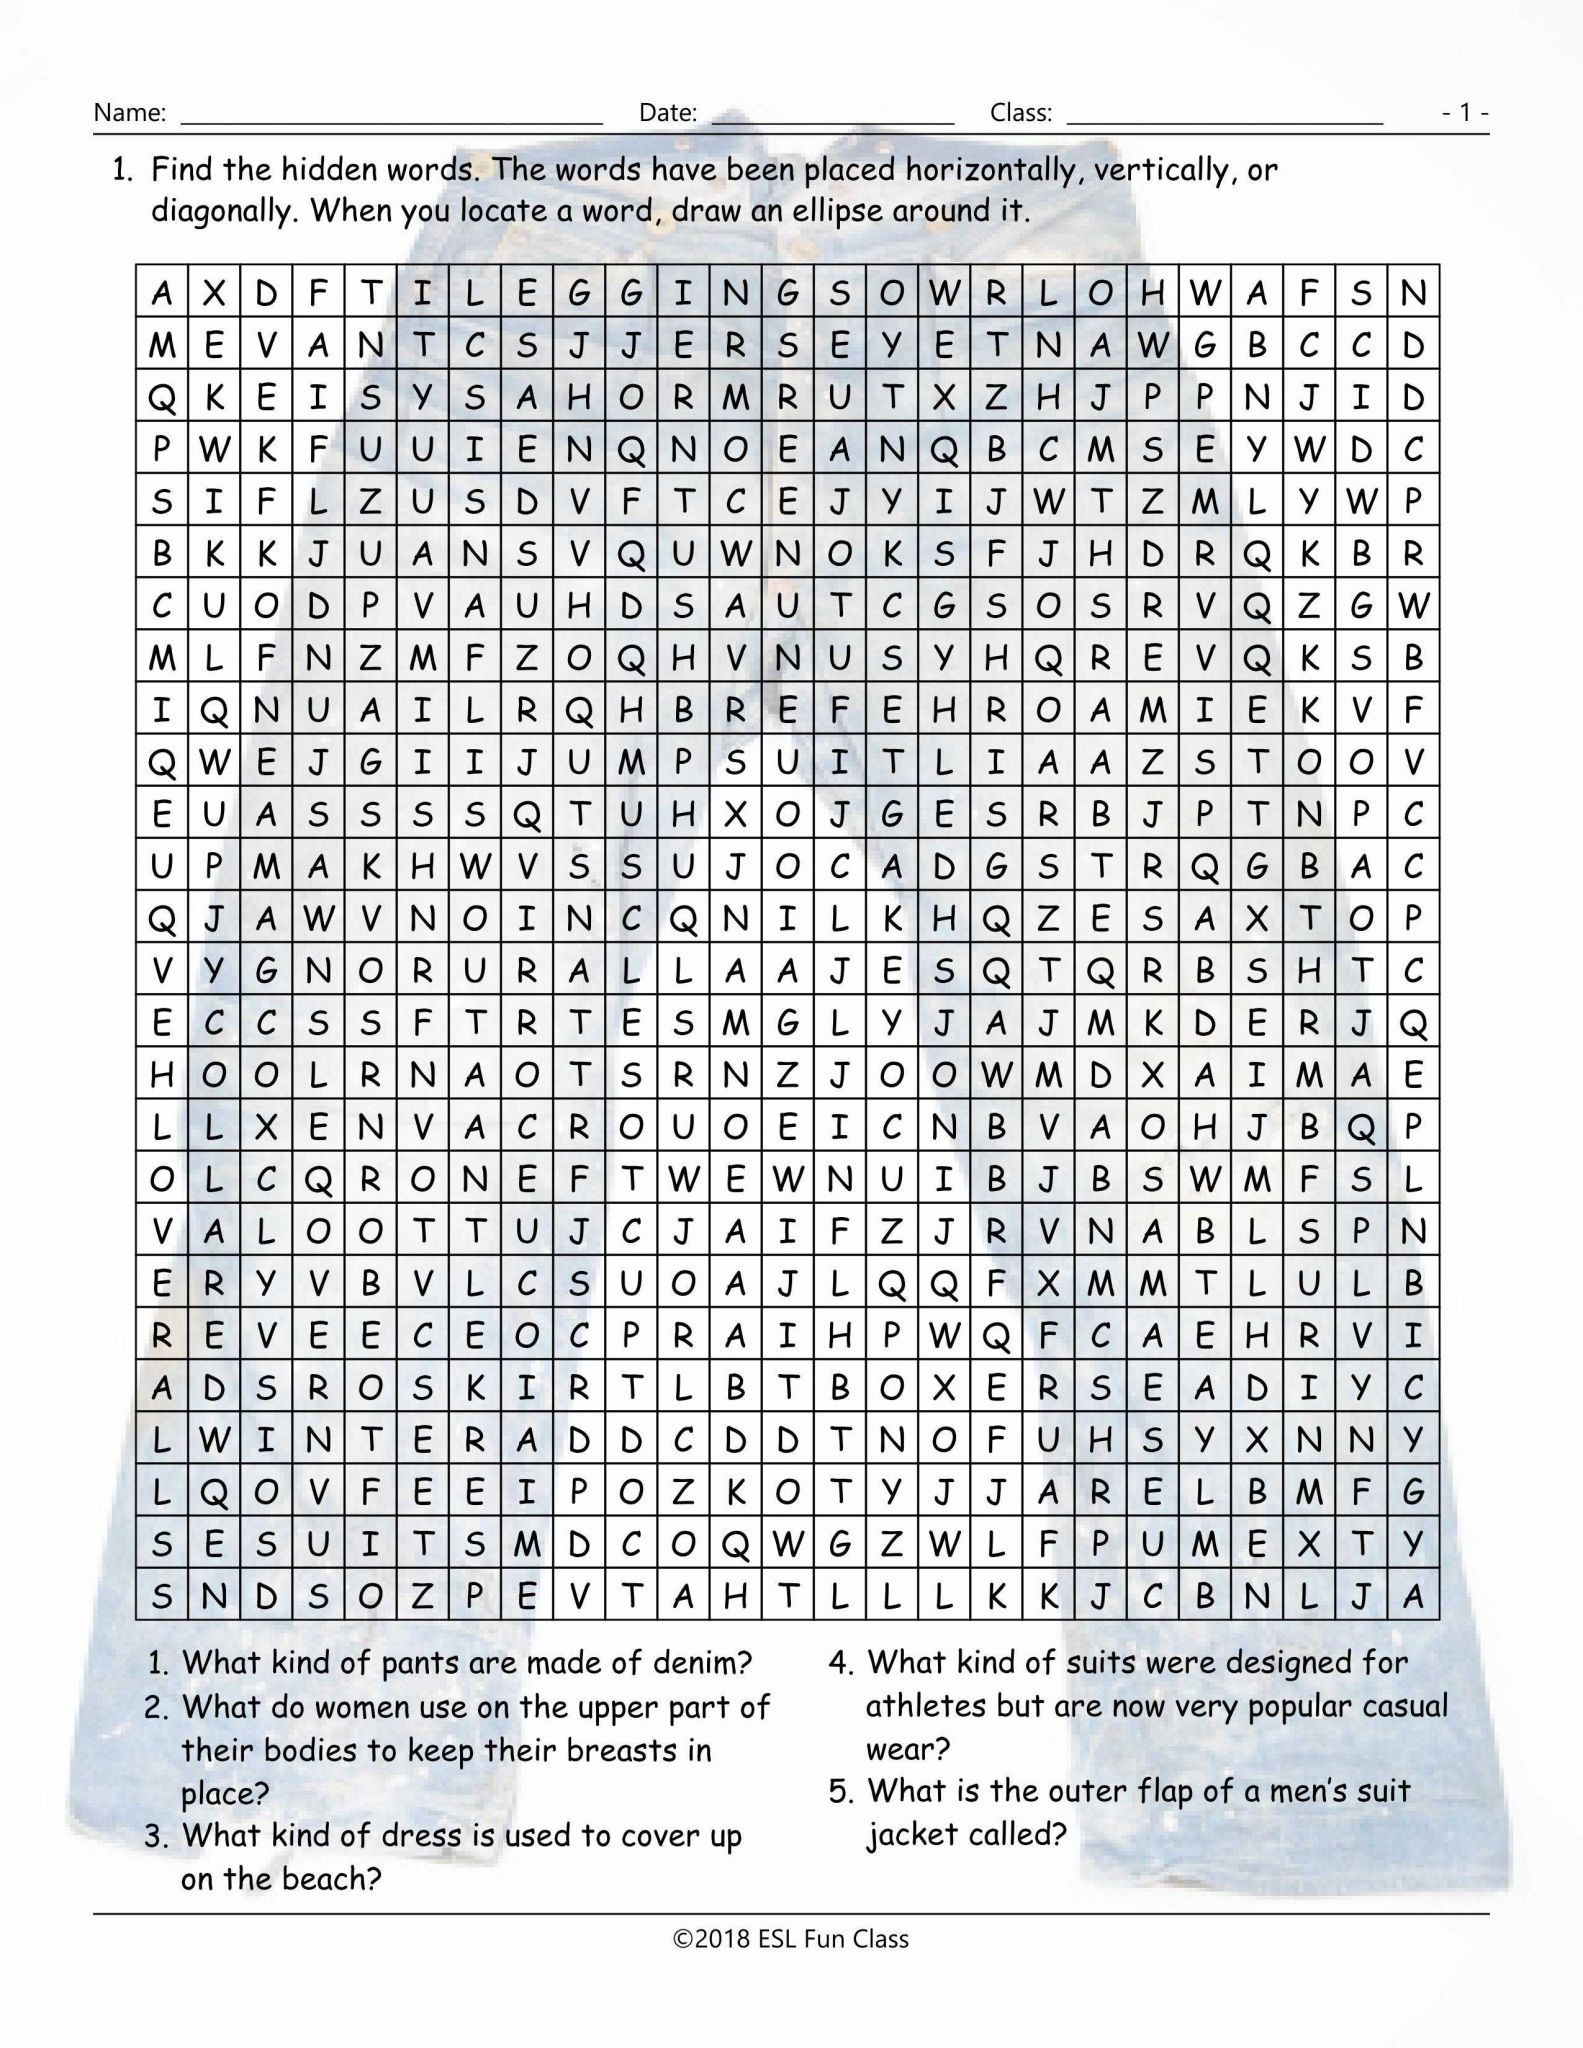 Esl Grammar Worksheets as Well as Vocabulary Word Search Worksheets Esl Fun Games Have Fun